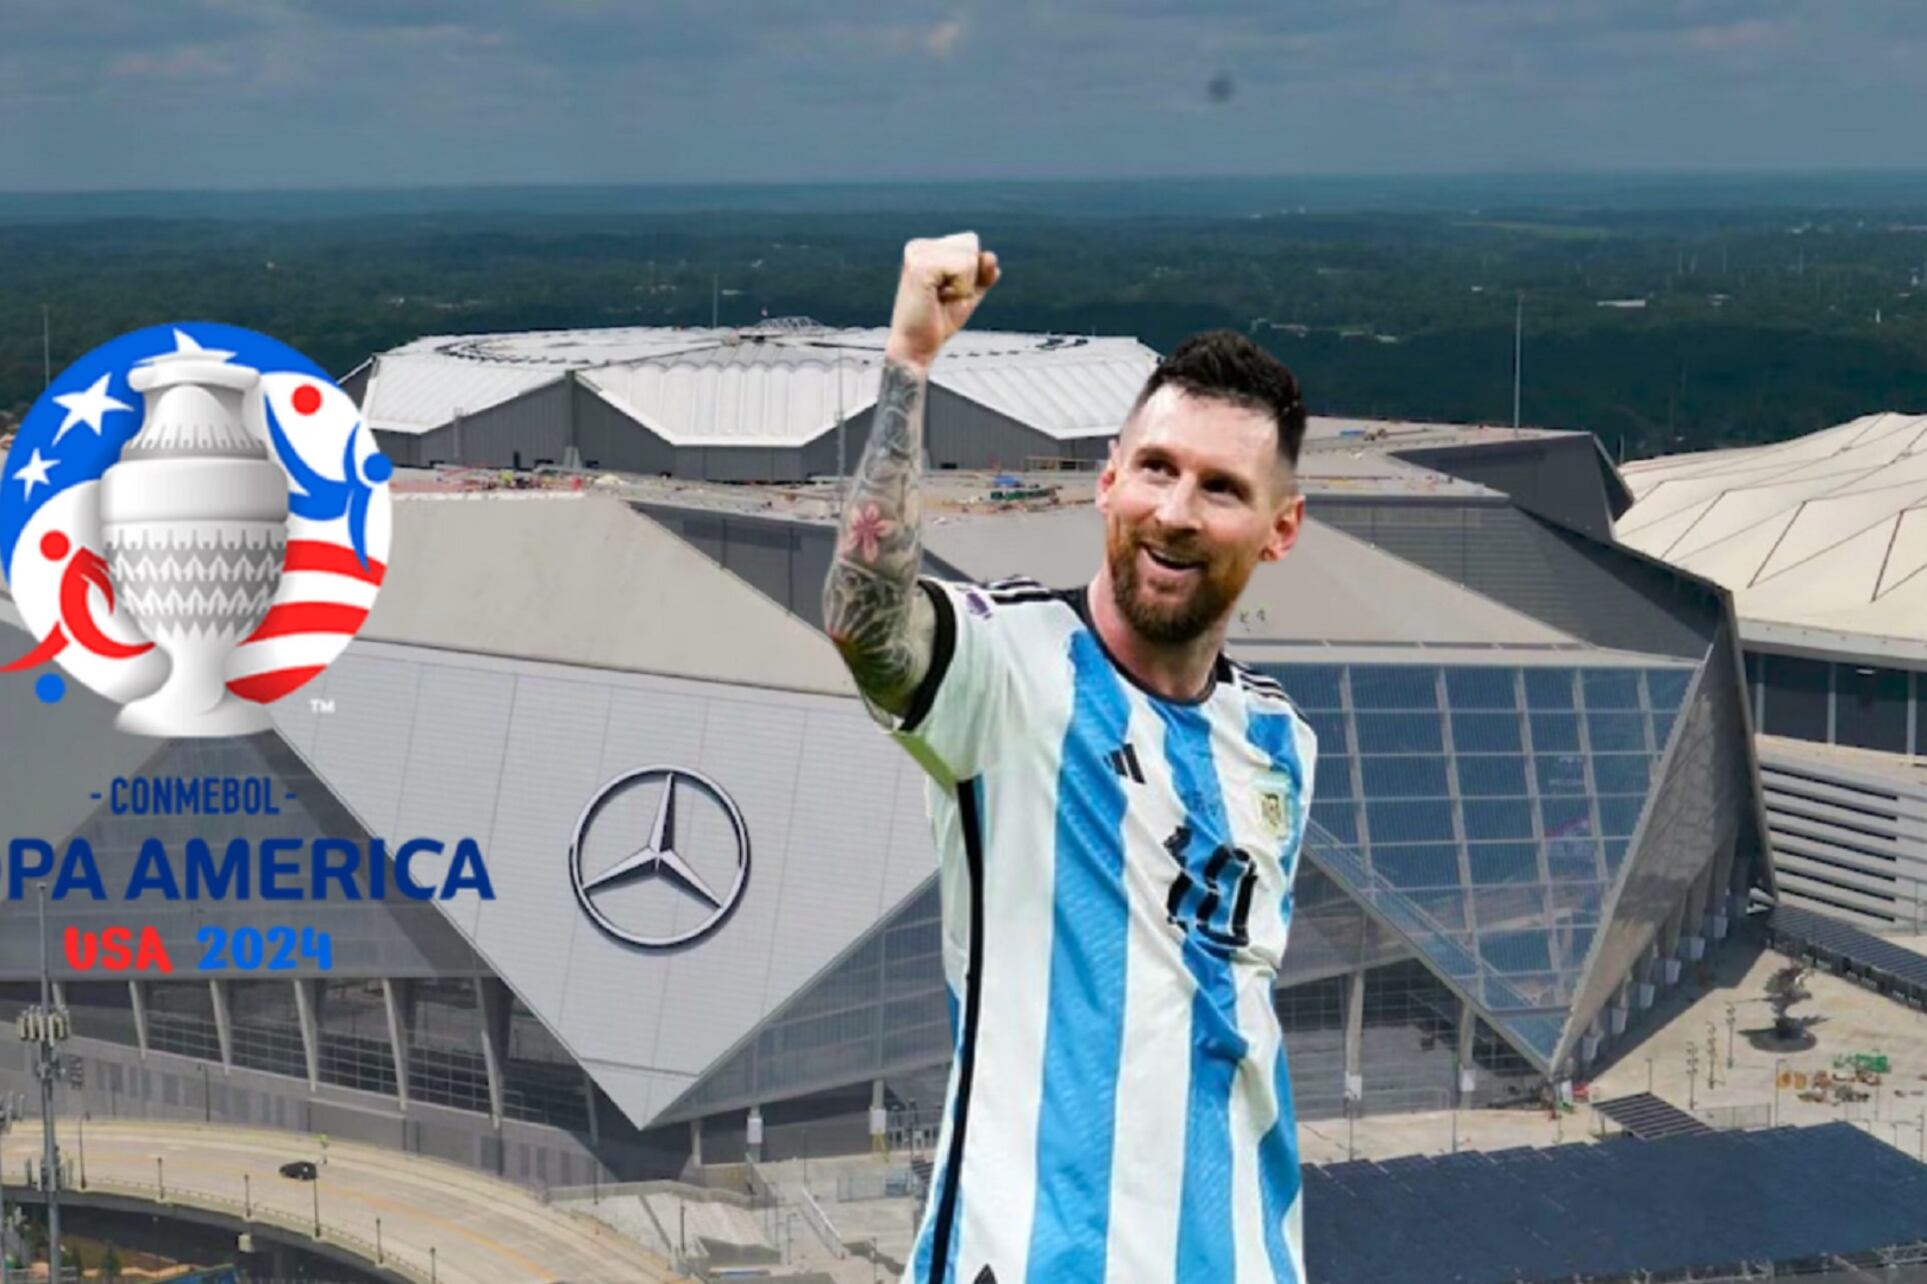 They're crazy for Messi: what will happen in Argentina's Copa America debut?